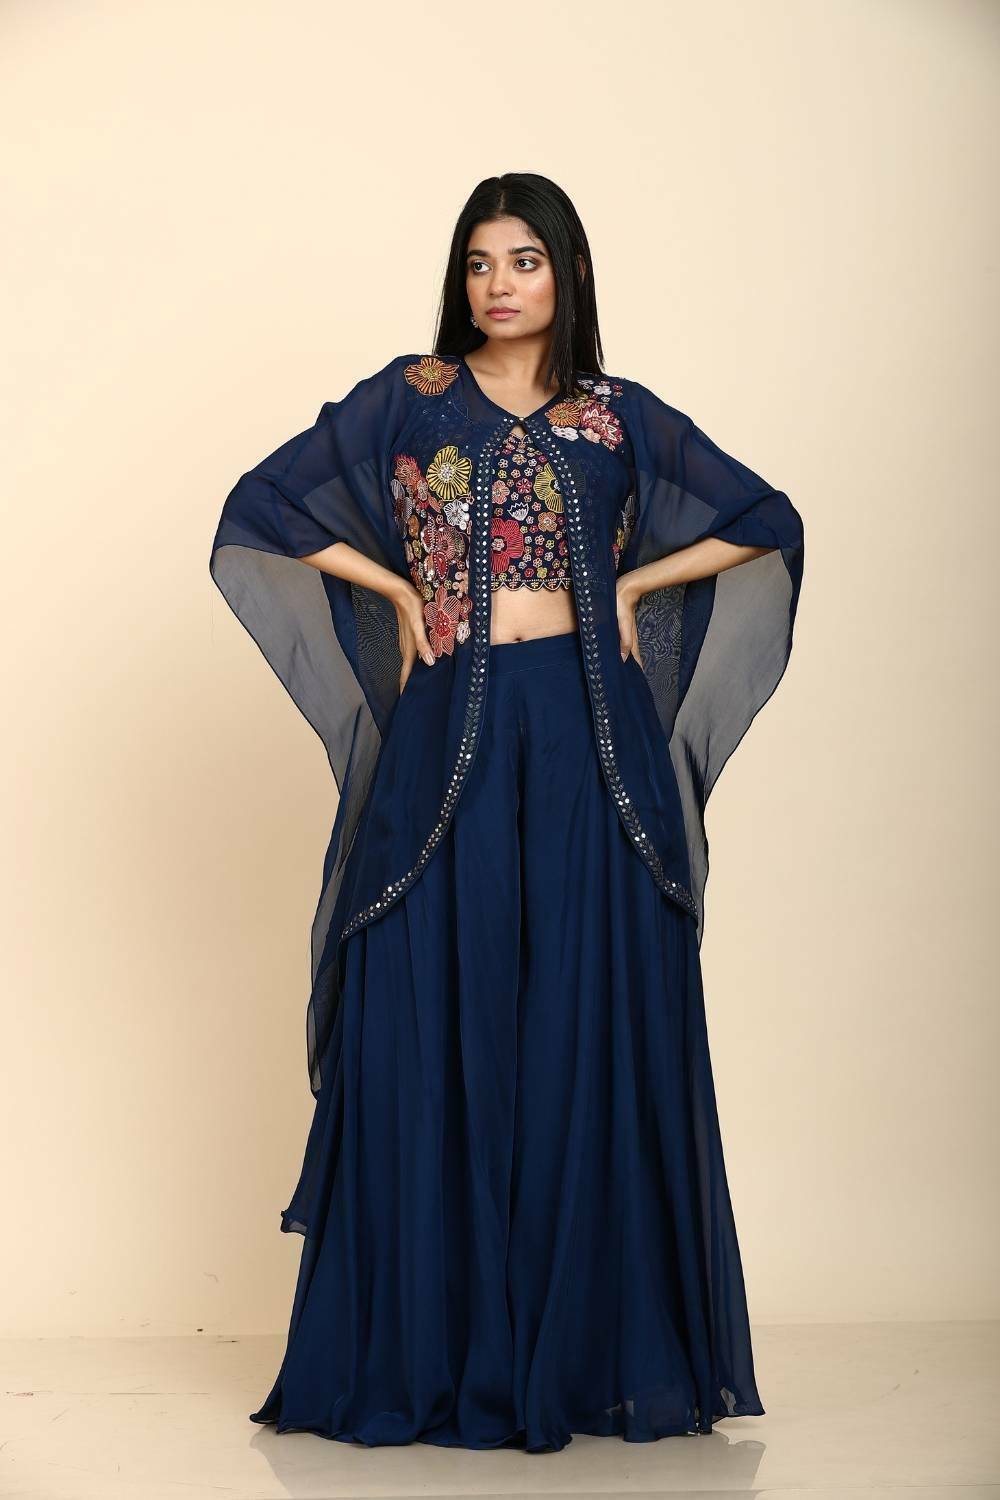 Blue resham coloured with moti and mirror work palazzo blouse with jacket